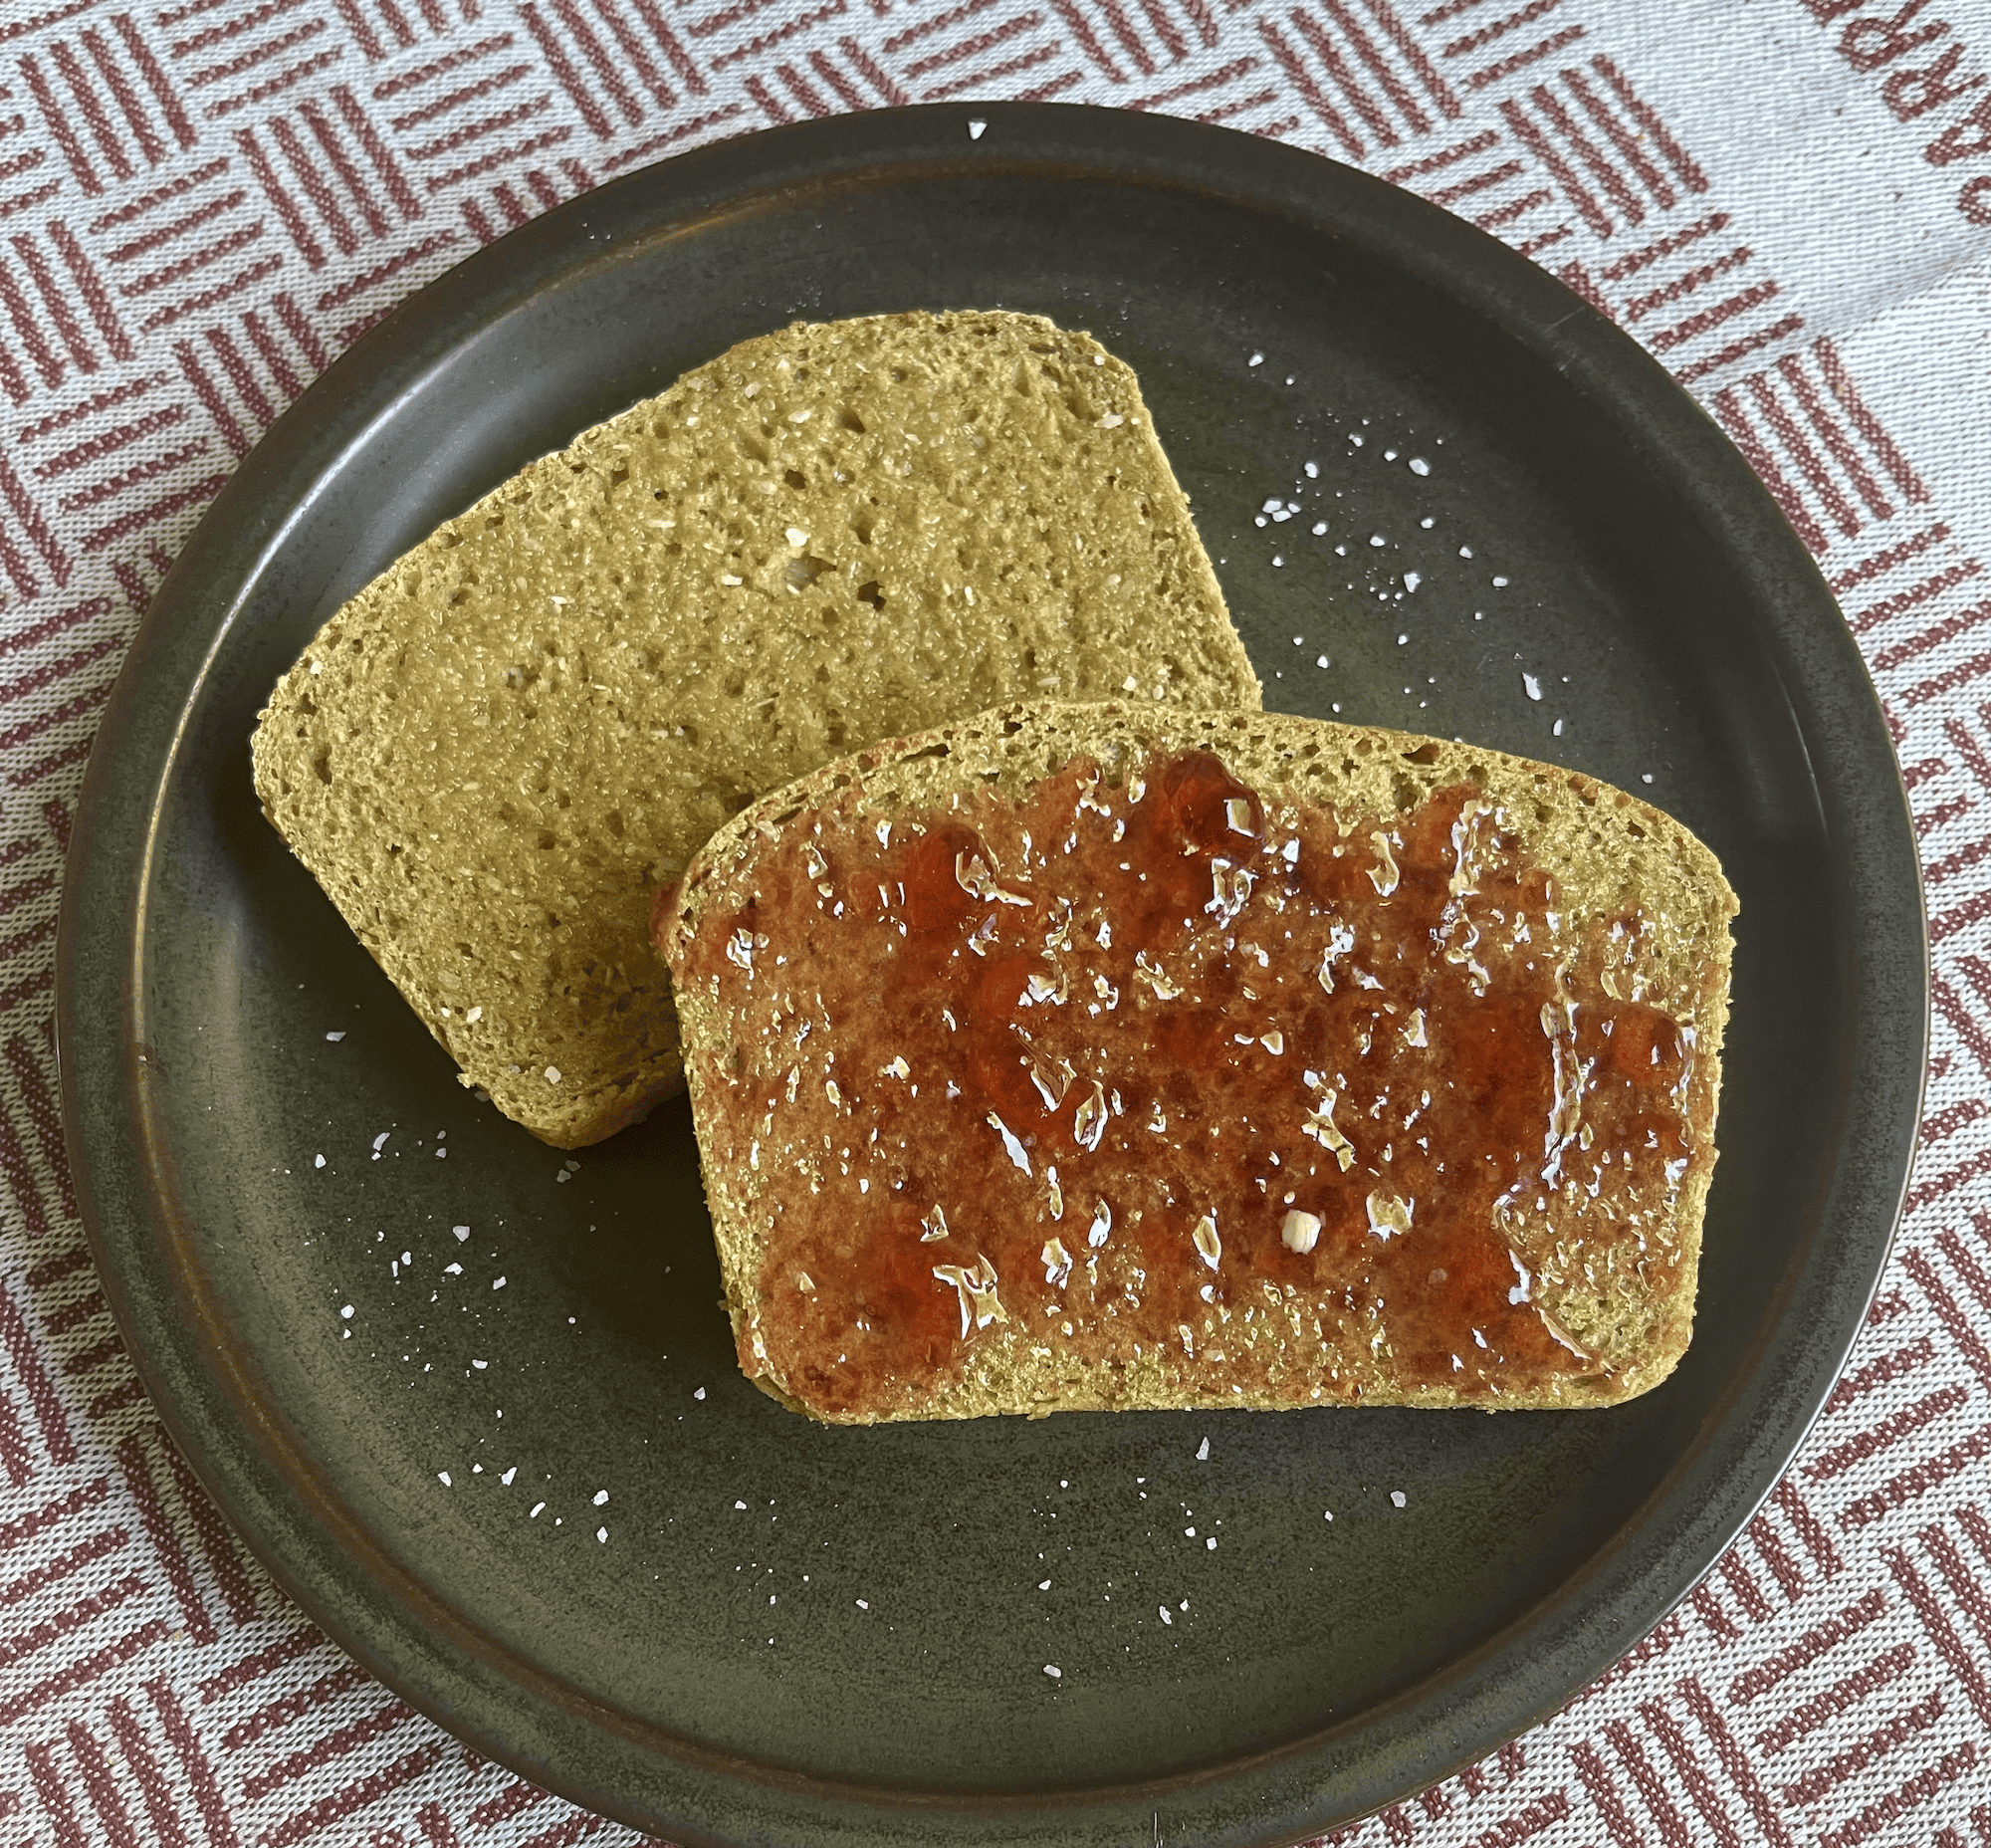 Toasted einkorn bread with butter and jam